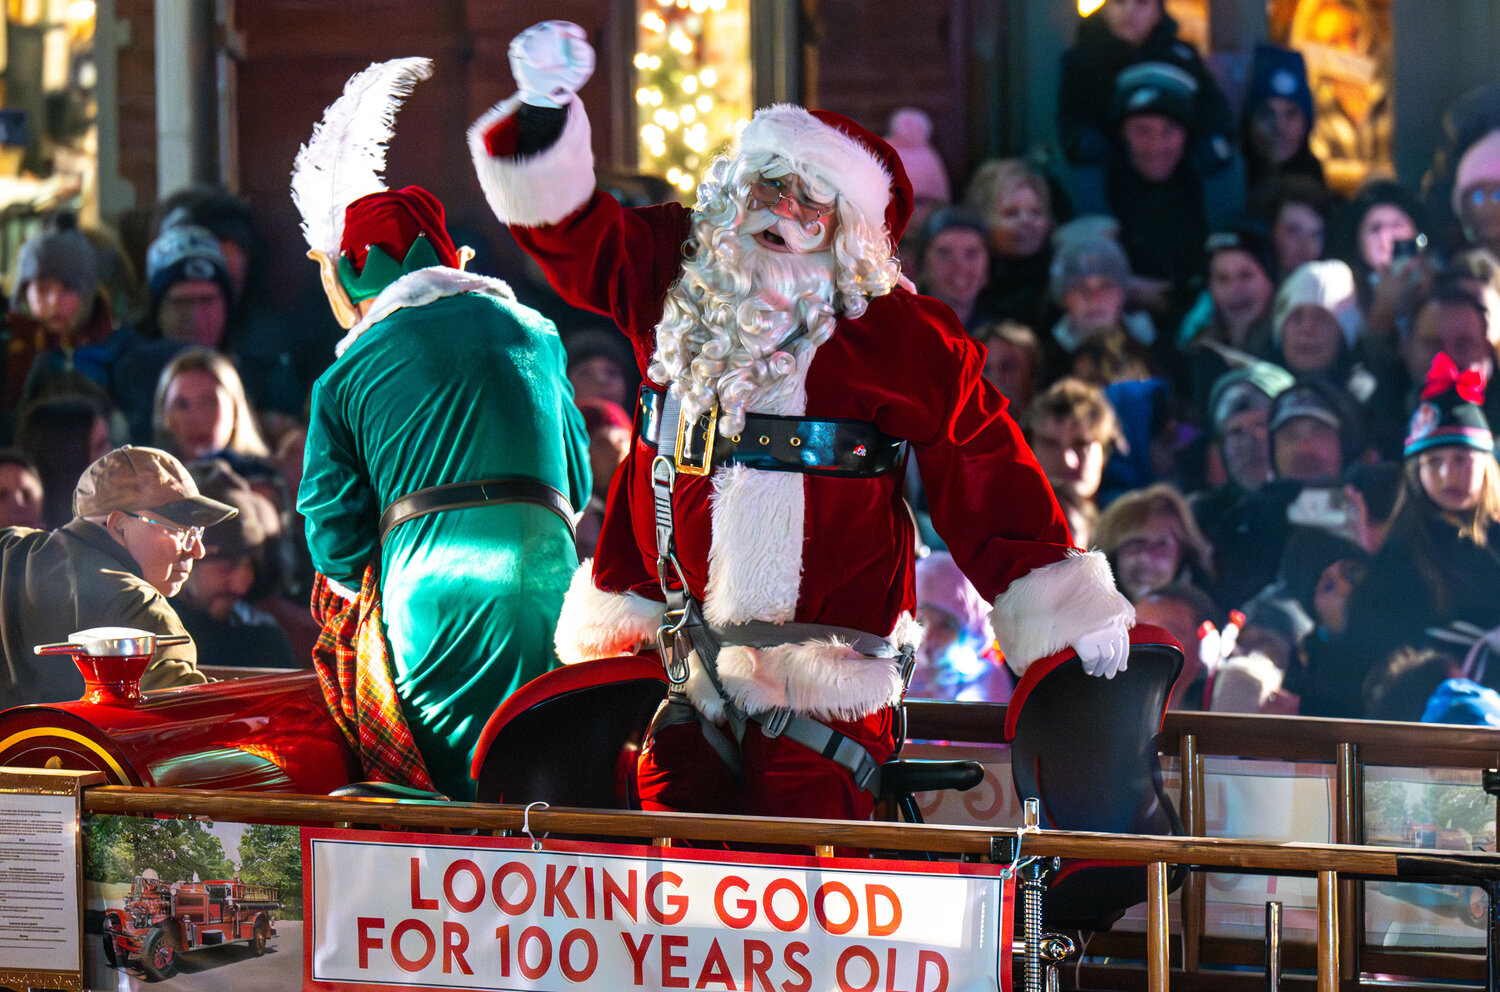 Santa Claus waves to the crowd at Doylestown Winterfest Friday. He arrived on Doylestown Fire Co.’s classic fire truck, the Ahrens “Fox” Pumper, which the company purchased in 1923.